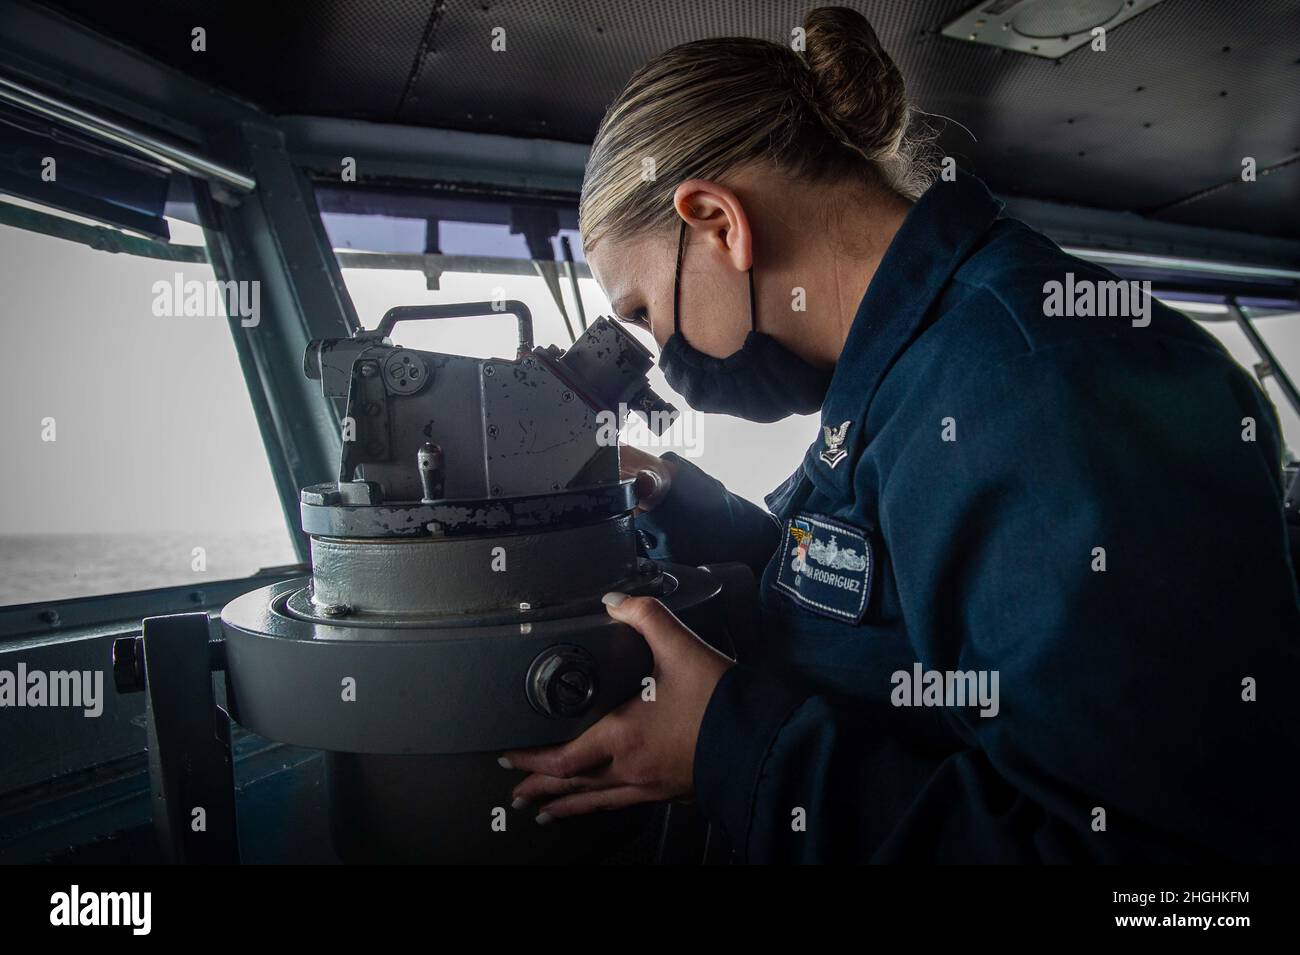 210805-N-RO680-1019 PACIFIC OCEAN (August 5, 2021) Quartermaster 2nd Class Katryna Rodriguez, a native of Boise, Idaho, looks through a telescopic alidade in the pilot house of Nimitz-class aircraft carrier USS Carl Vinson (CVN 70), August 5, 2021. The Carl Vinson Carrier Strike Group (CVCSG), led by Carrier Strike Group (CSG) 1, is deployed in support of global maritime security operations. Stock Photo